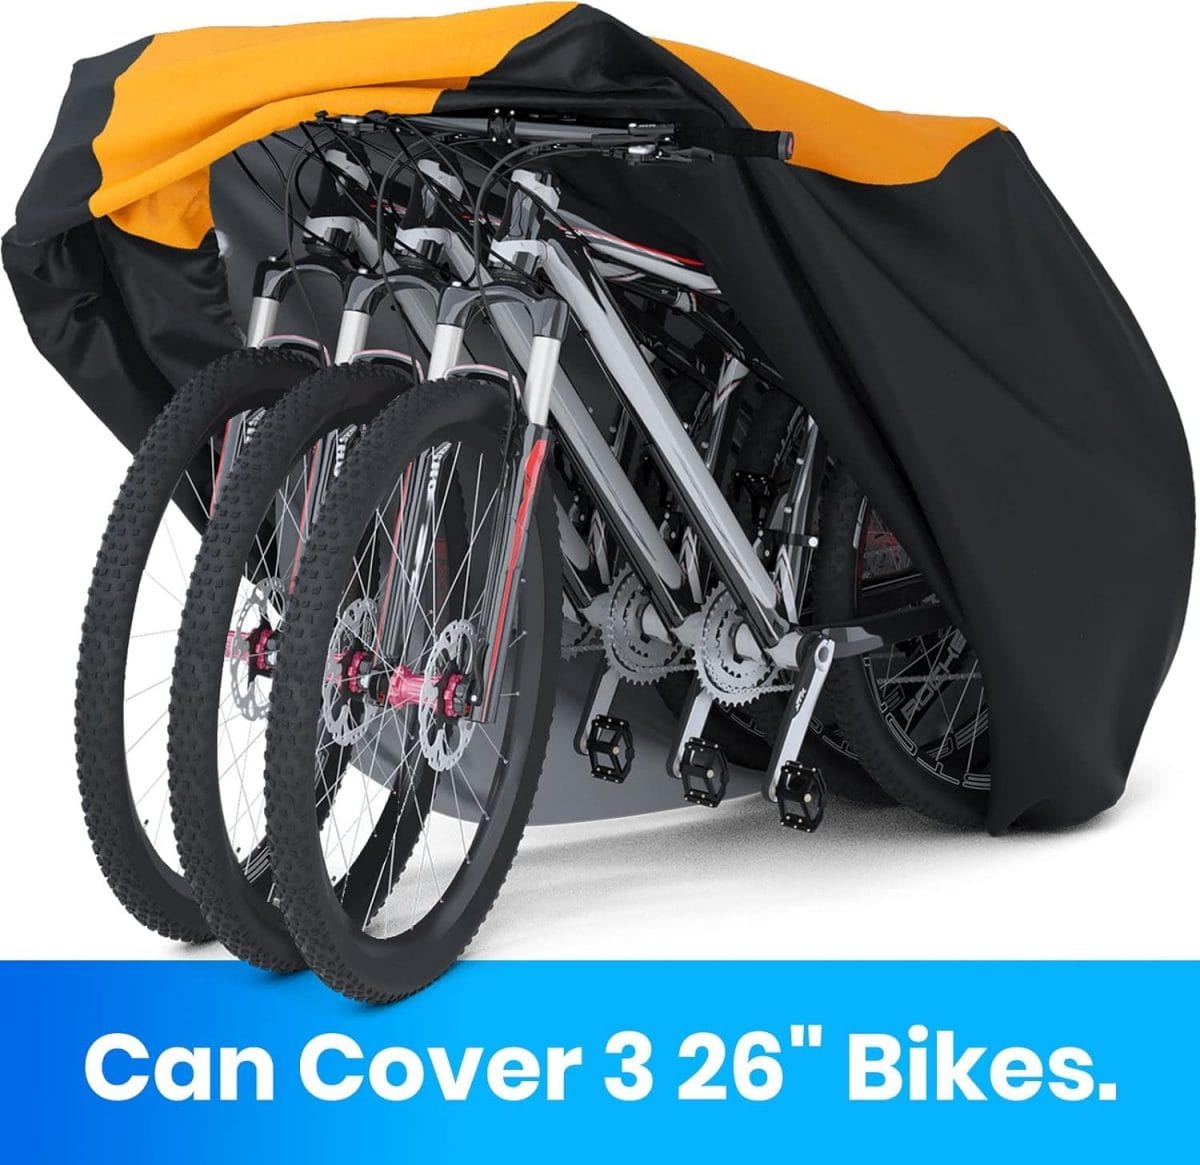 Favoto Bike Cover Waterproof Outdoor Bicycle Cover for 2-3 Bikes UV Snow Wind Proof with Anti-Theft Lock Hole Reflective Straps Storage Bag for Mountain Road Electric City Bike 79x41.3x44 Inch